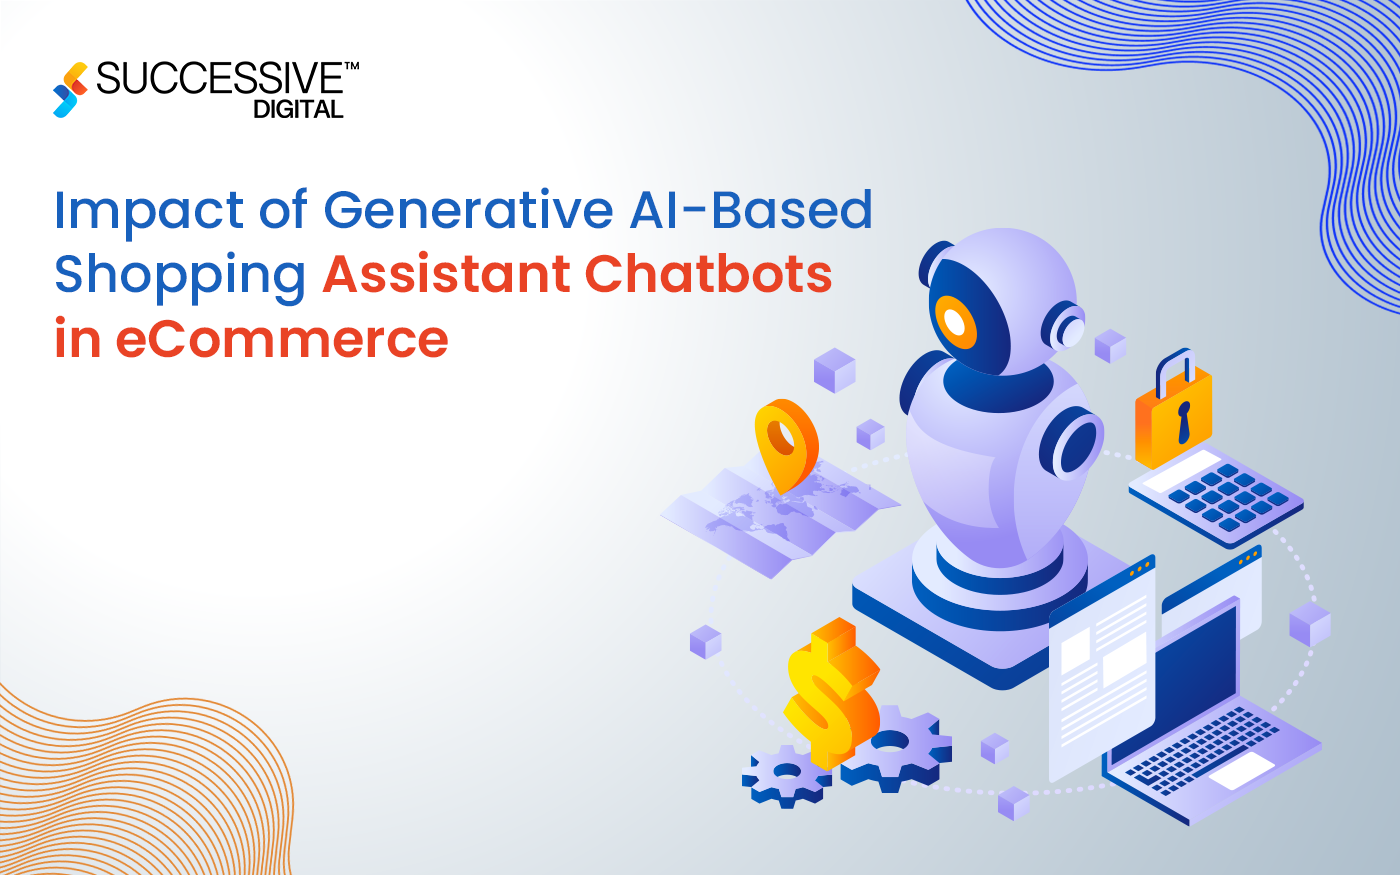 Impact of Generative AI-Based Shopping Assistant Chatbots in eCommerce